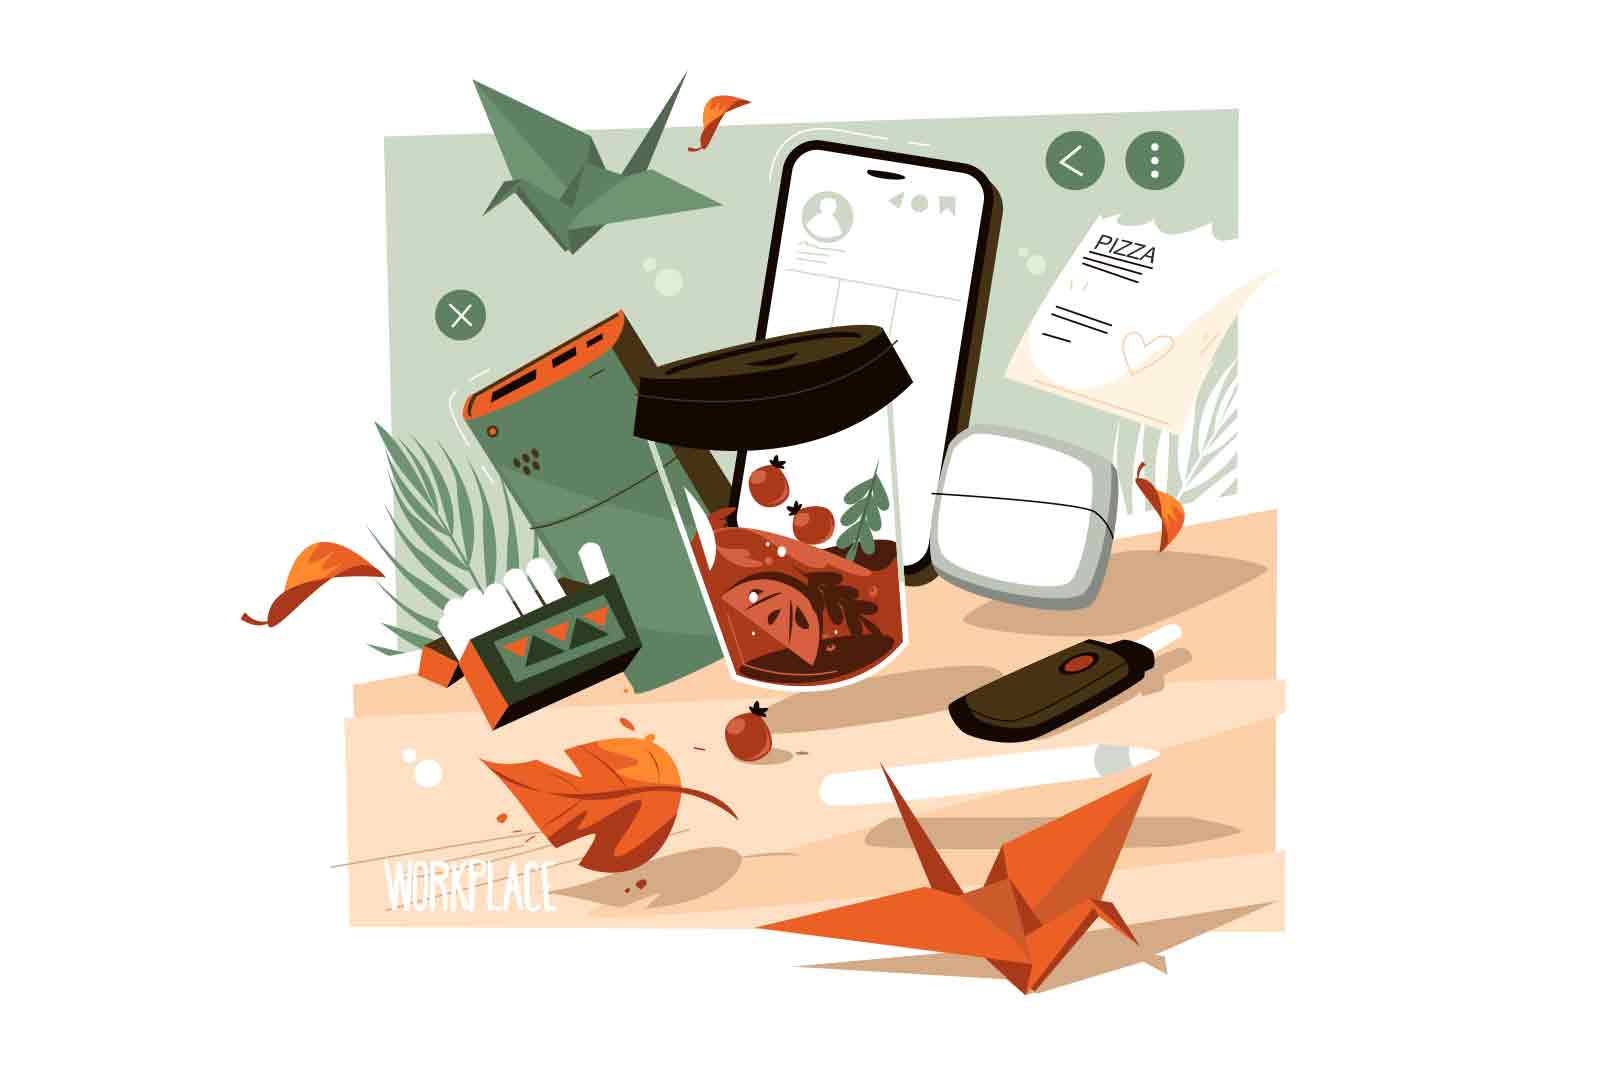 Workplace with different devices and tools vector illustration. Smartphone, cigarettes, cup of tea, earphones. Workspace flat concept